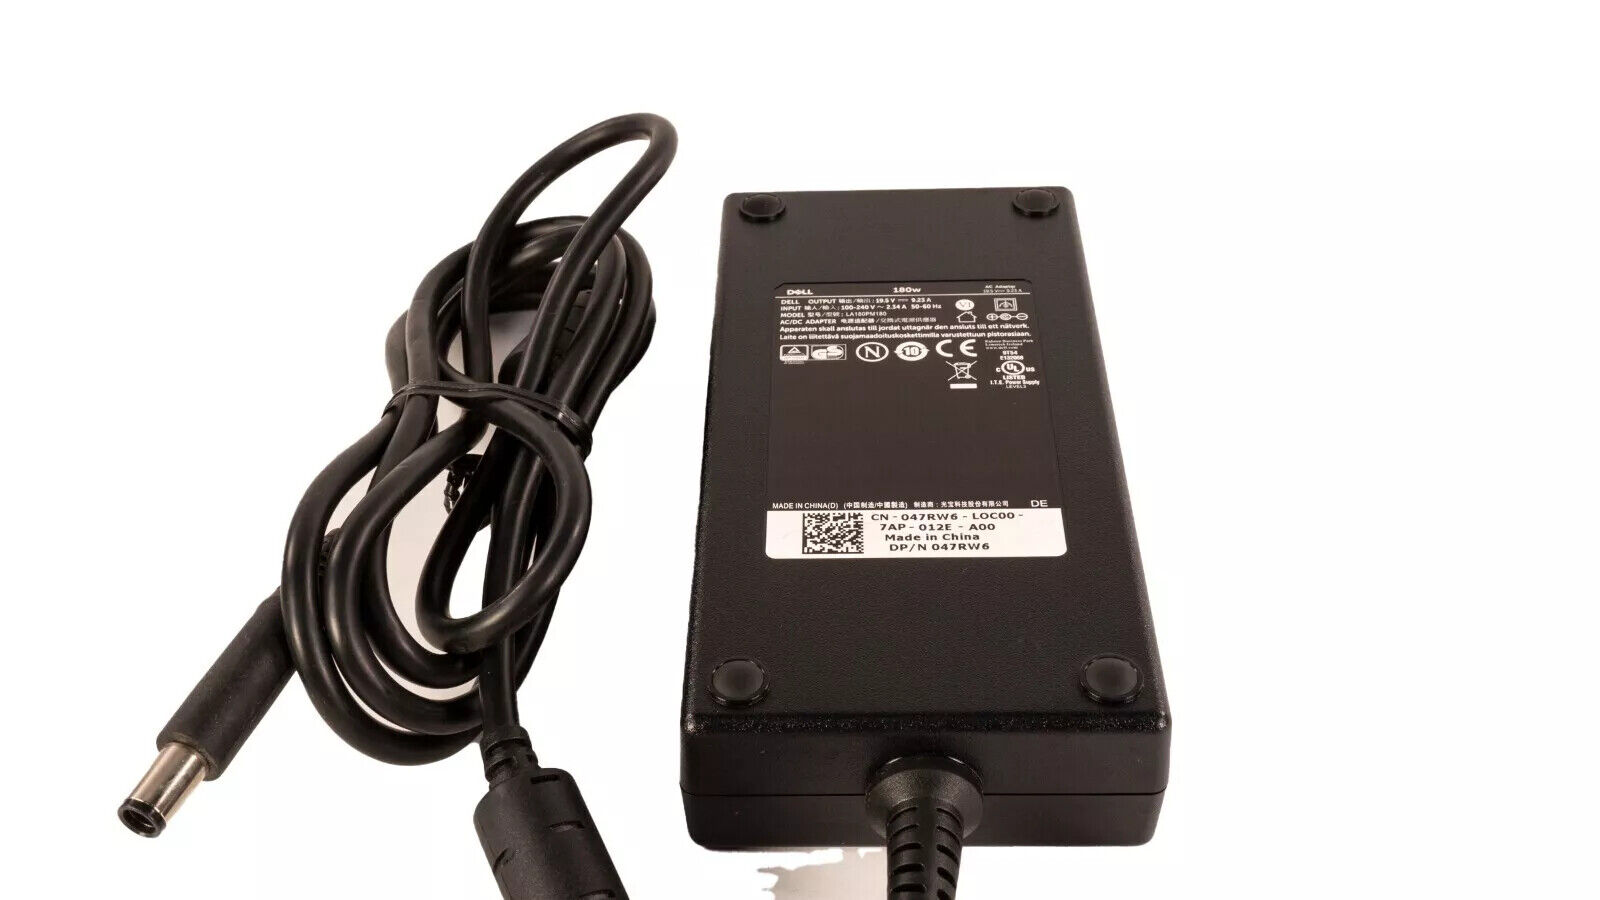 DELL 180W 19.5V, 9.23A Charger LA180PM180 AC power Adapter Charger DP/N 047RW6